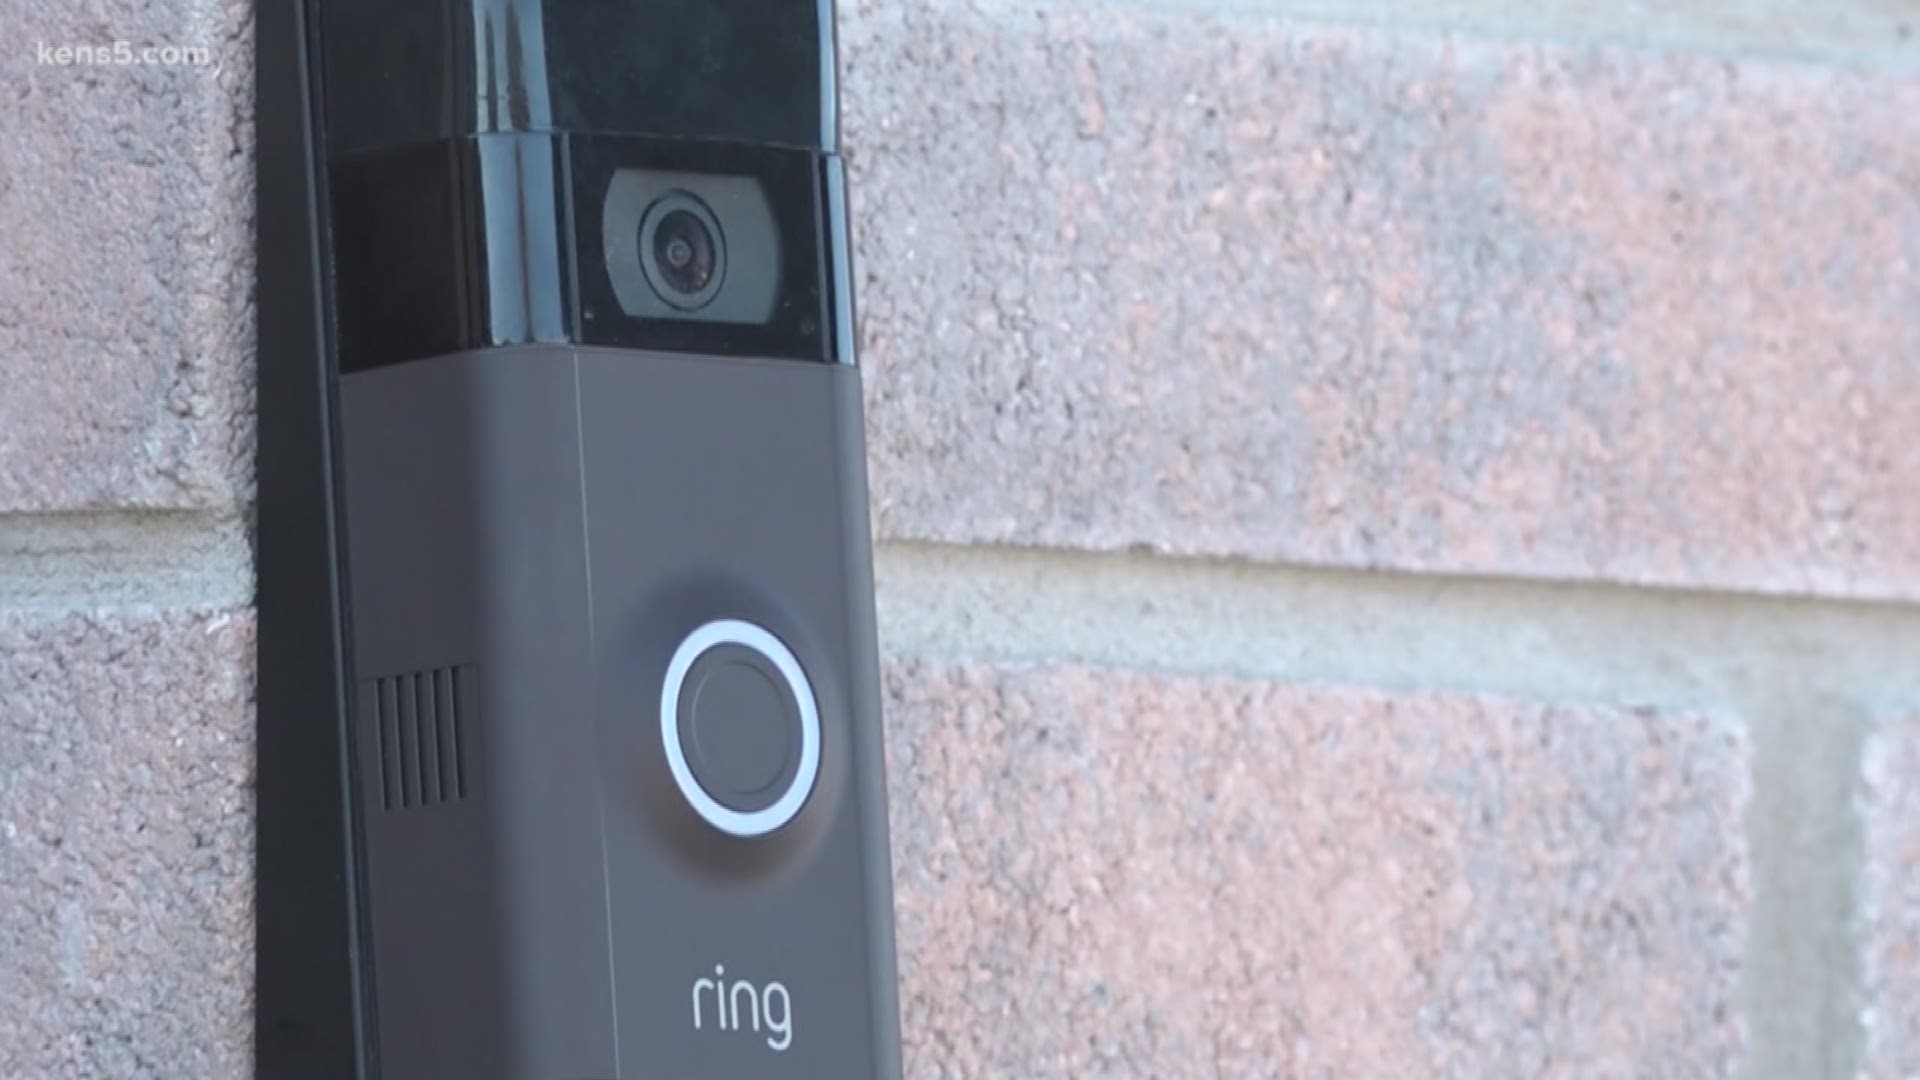 Ring donated 50 video doorbells to the agency. Rather than give them to his staff, Sheriff Javier Salazar decided they should go to victims of domestic violence.